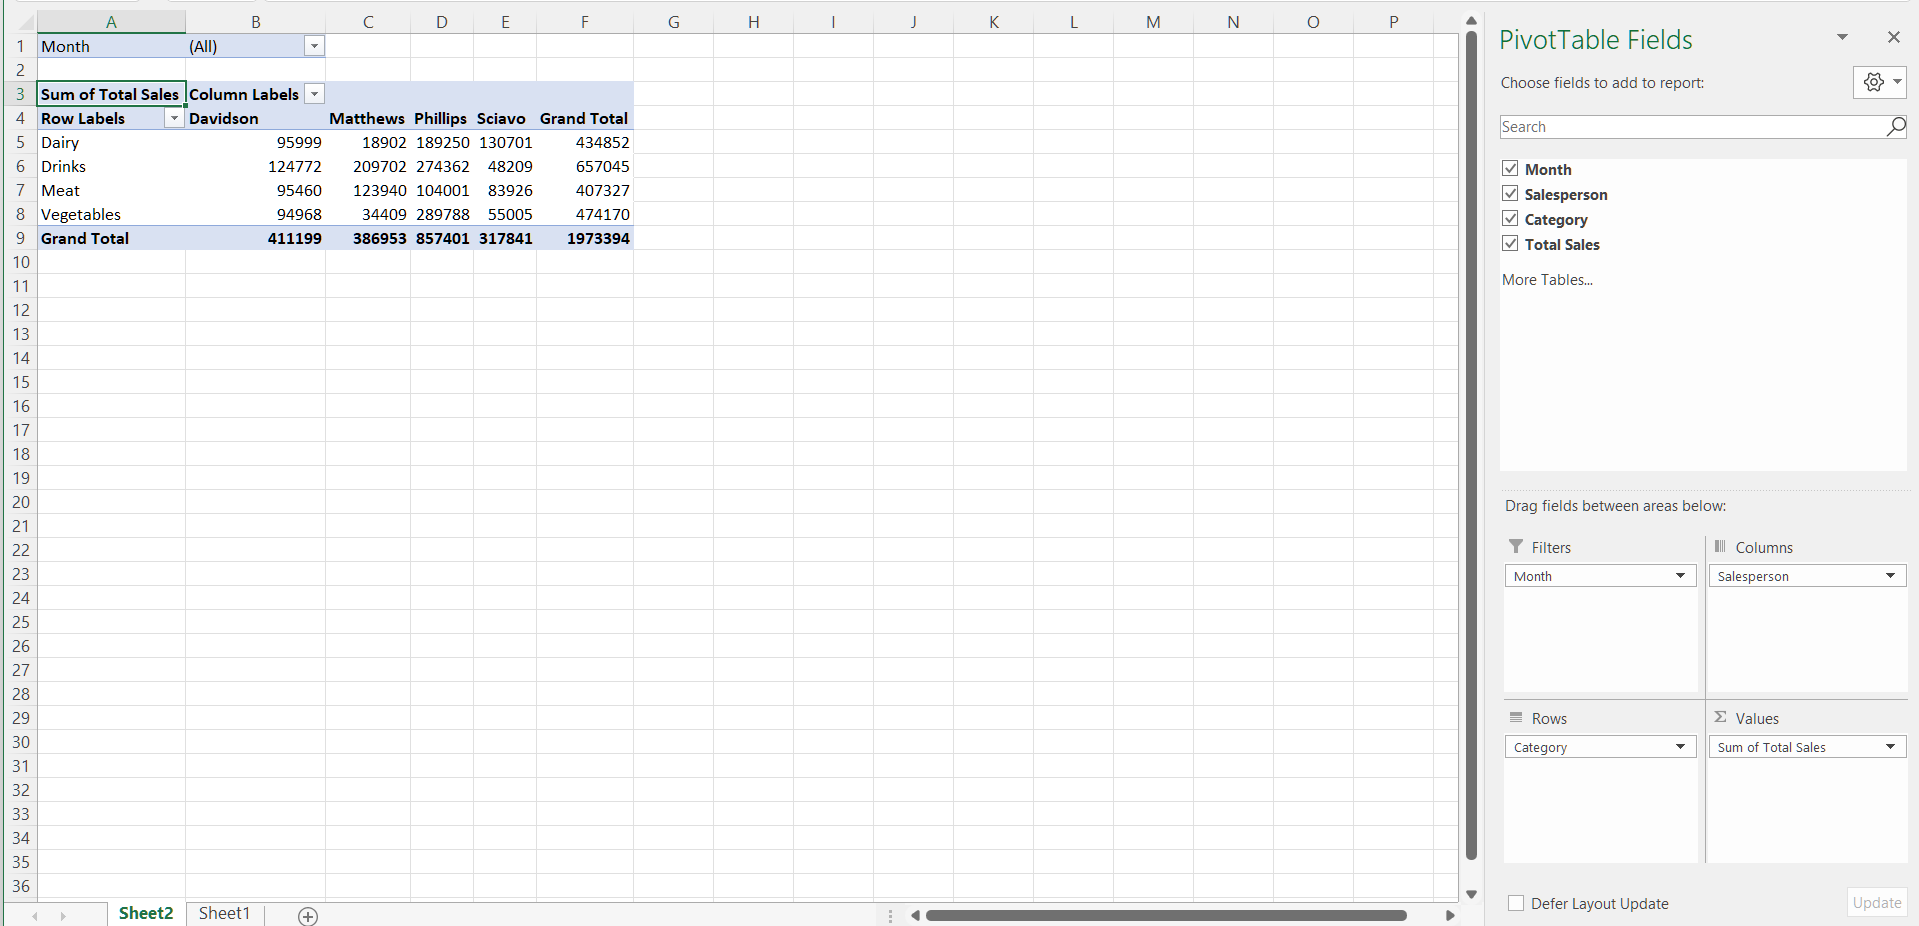 Different pivot table created using the same data